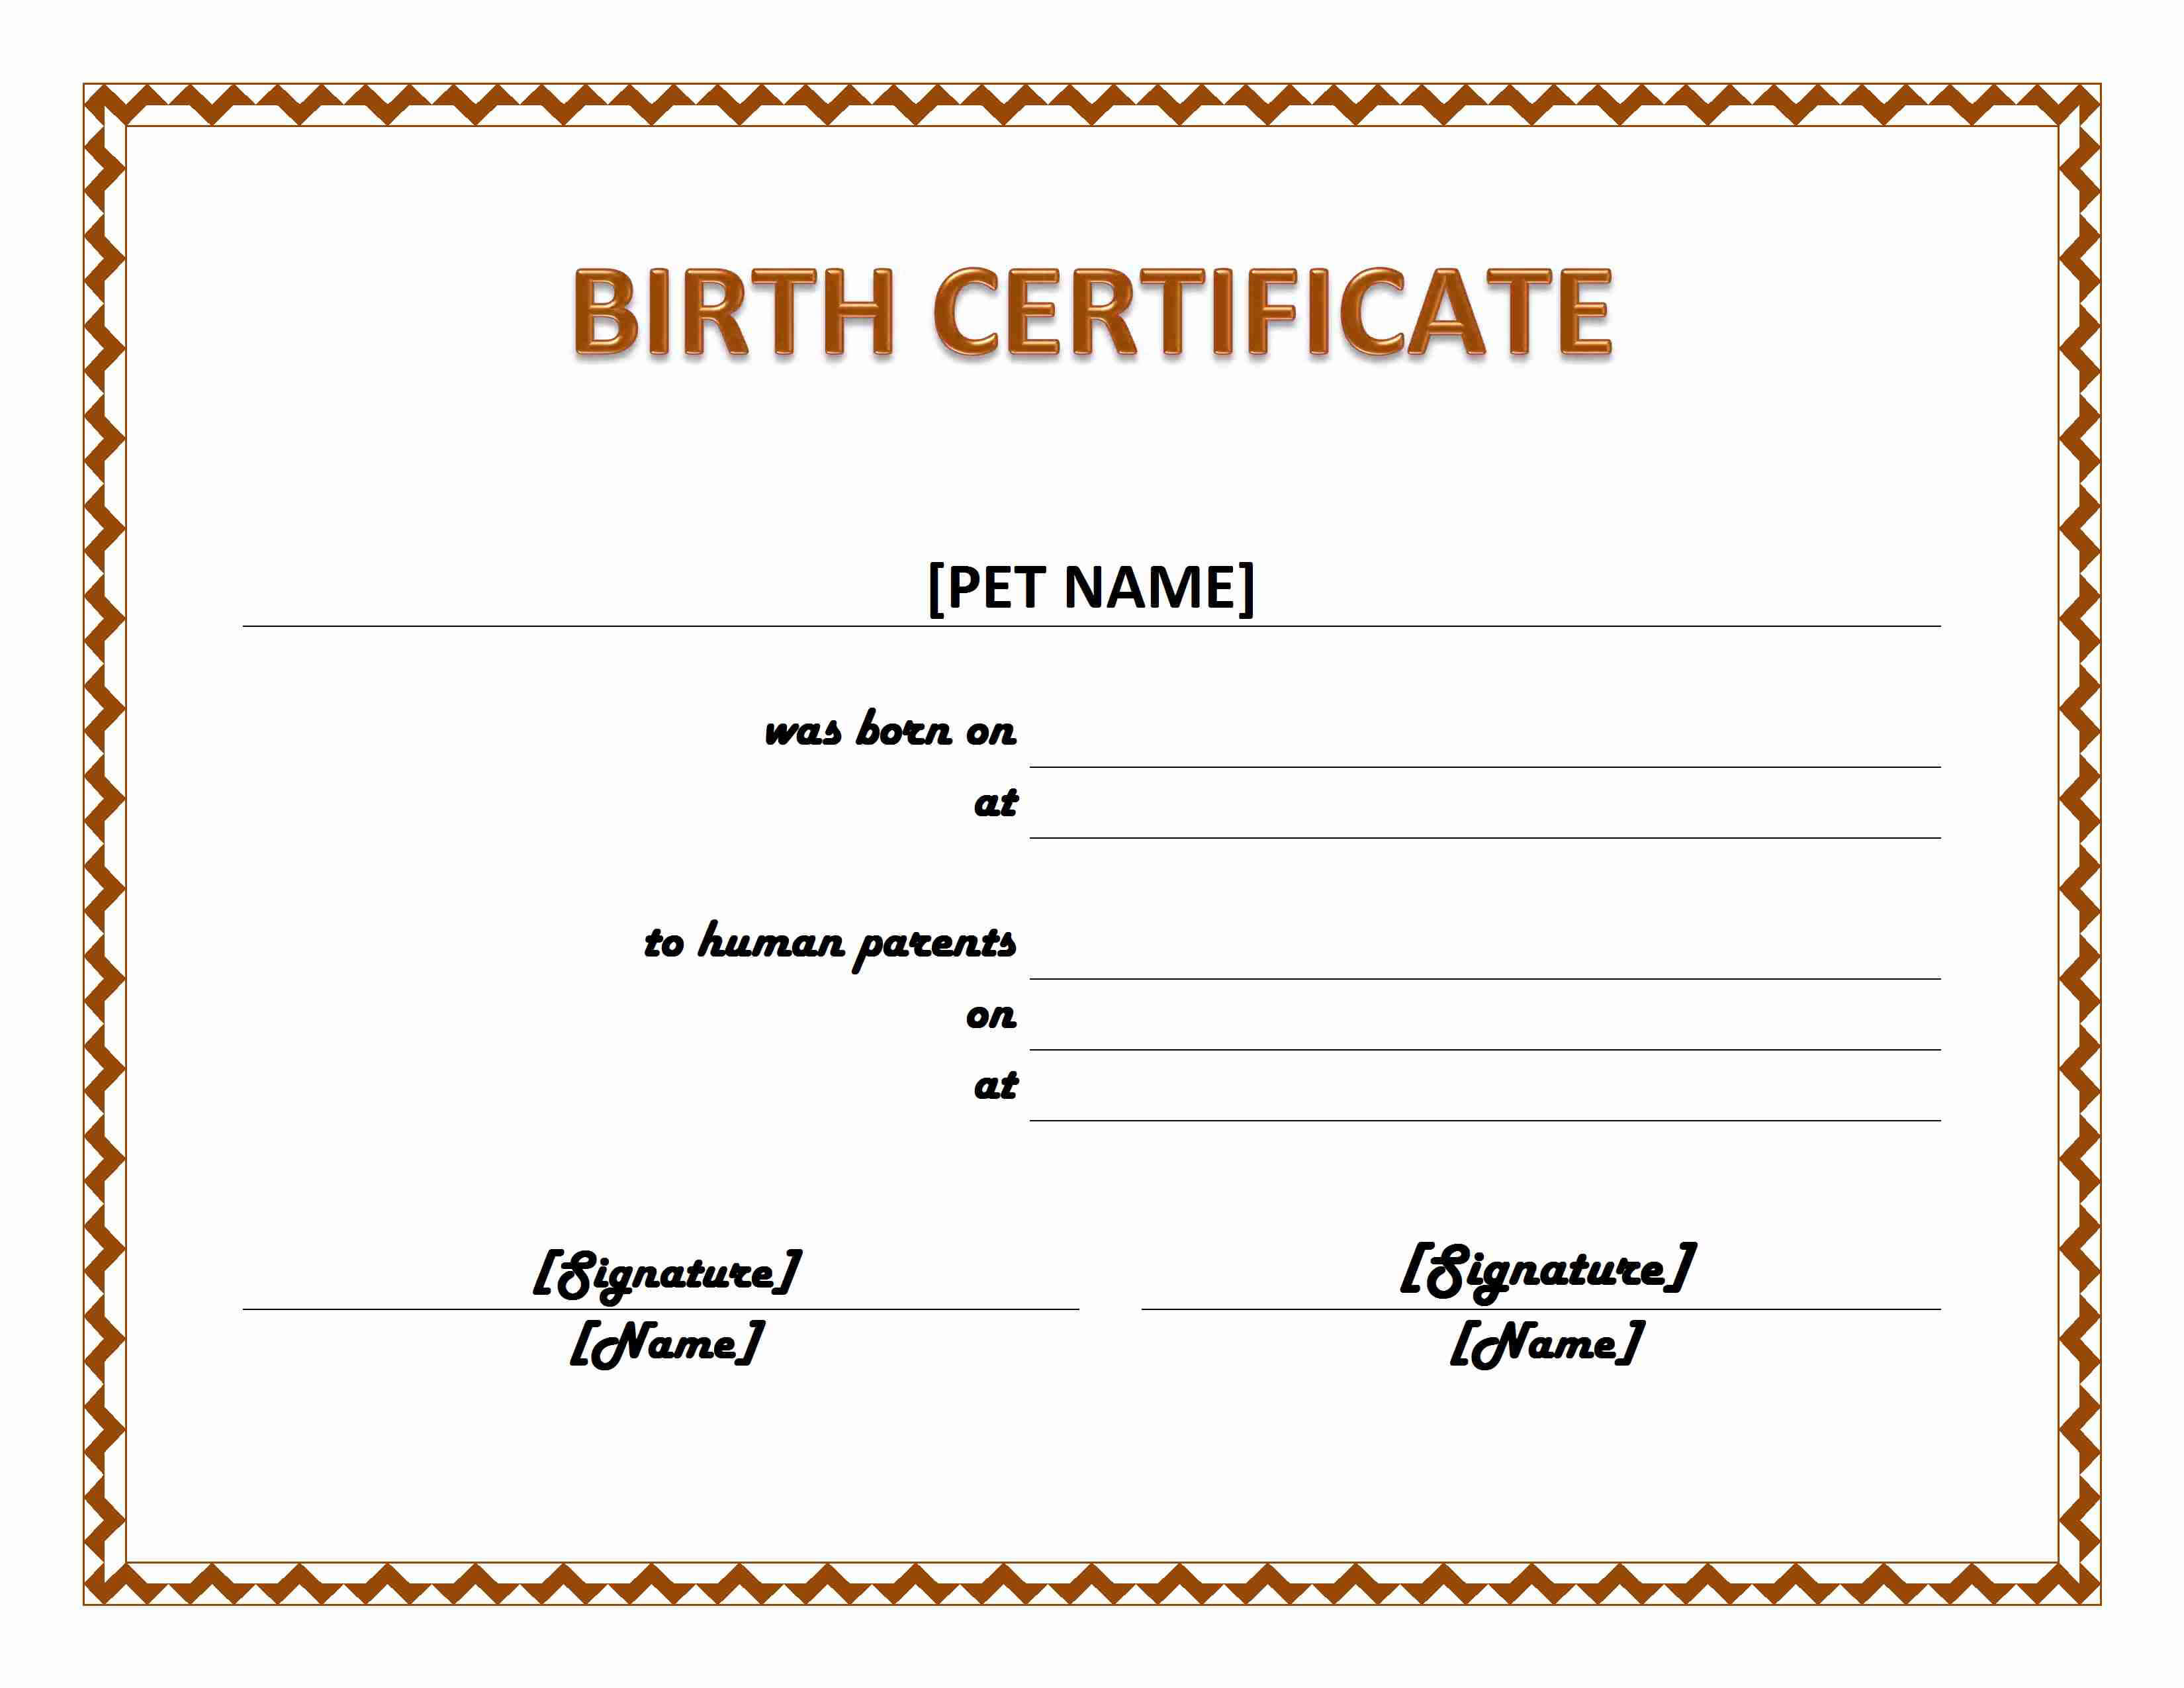 Pet Birth Certificate Template - Ms Word Templates Regarding Birth Certificate Templates For Word